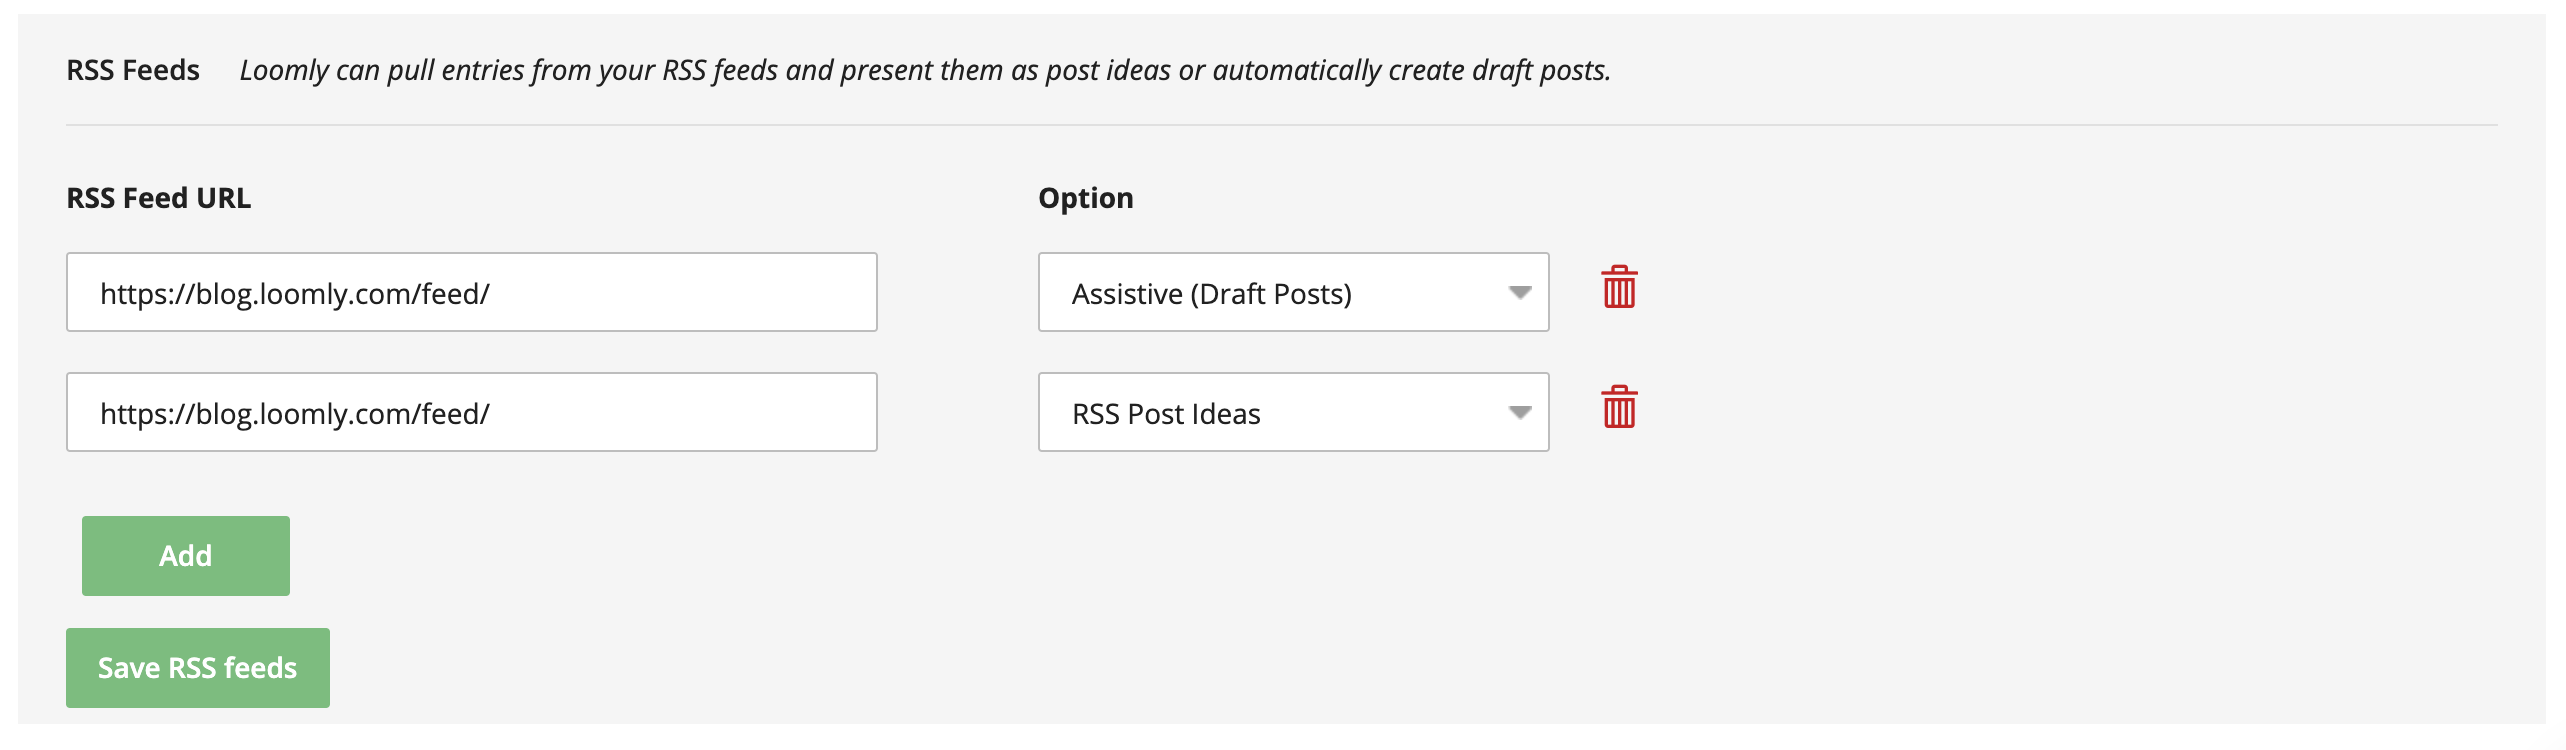 Loomly Brand Success Post Ideas From RSS Feeds